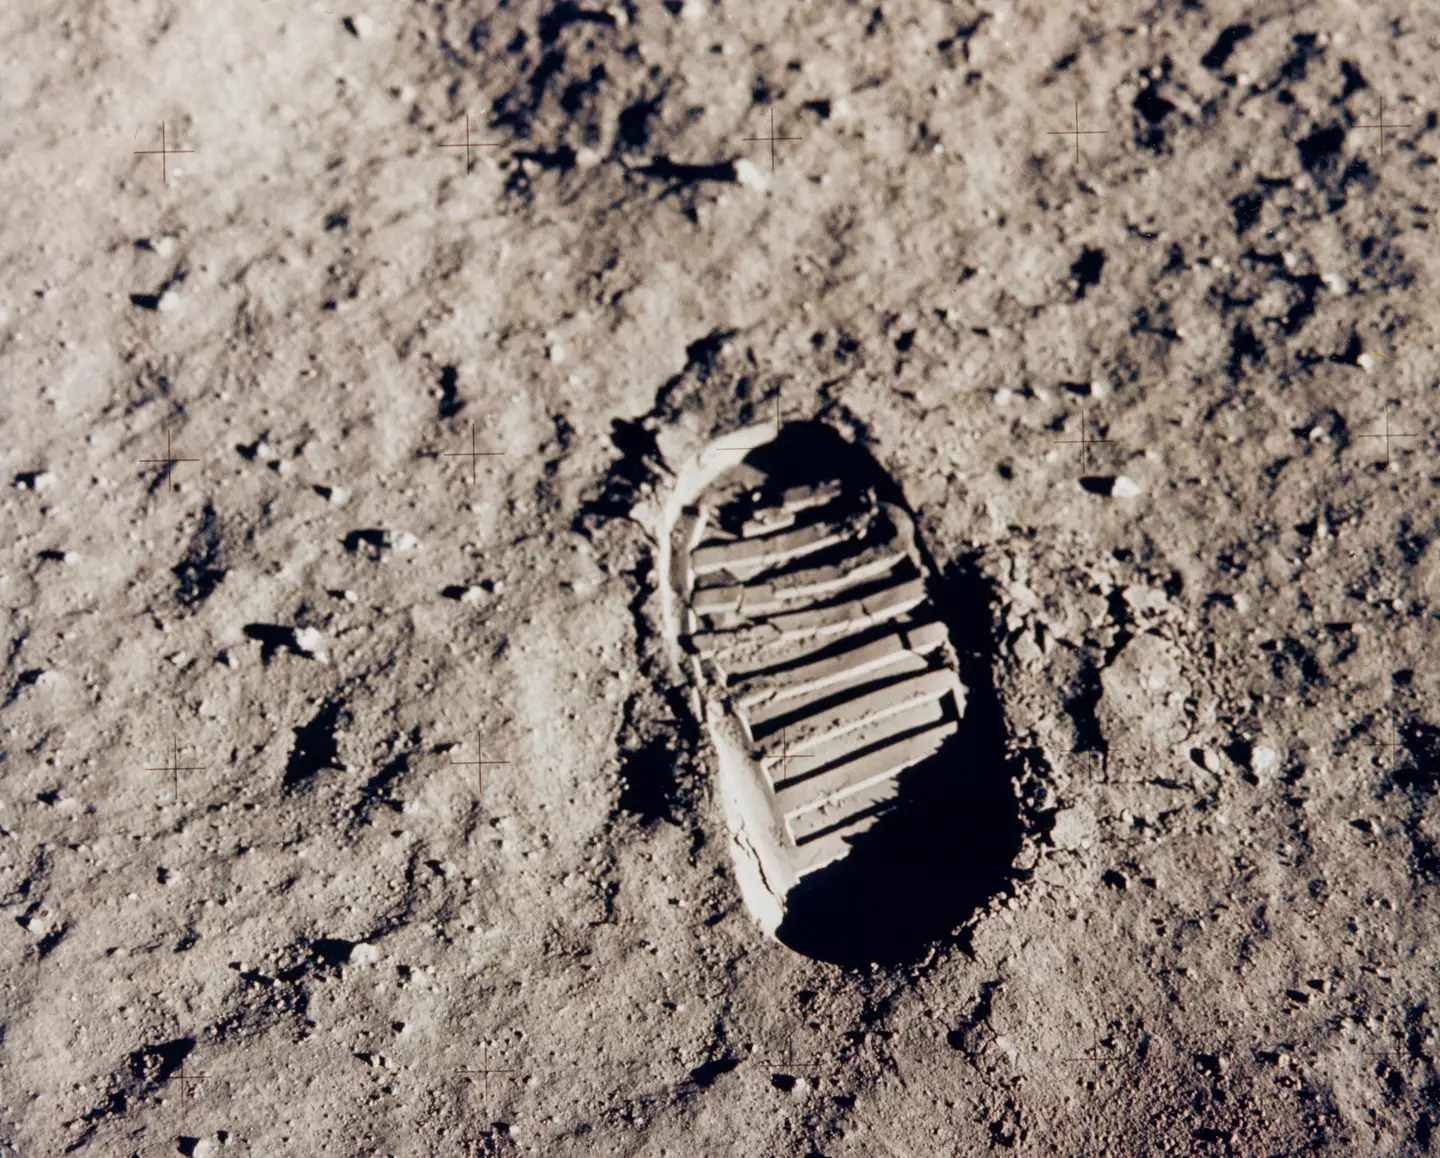 One social media user said the moon landings were technically staged.